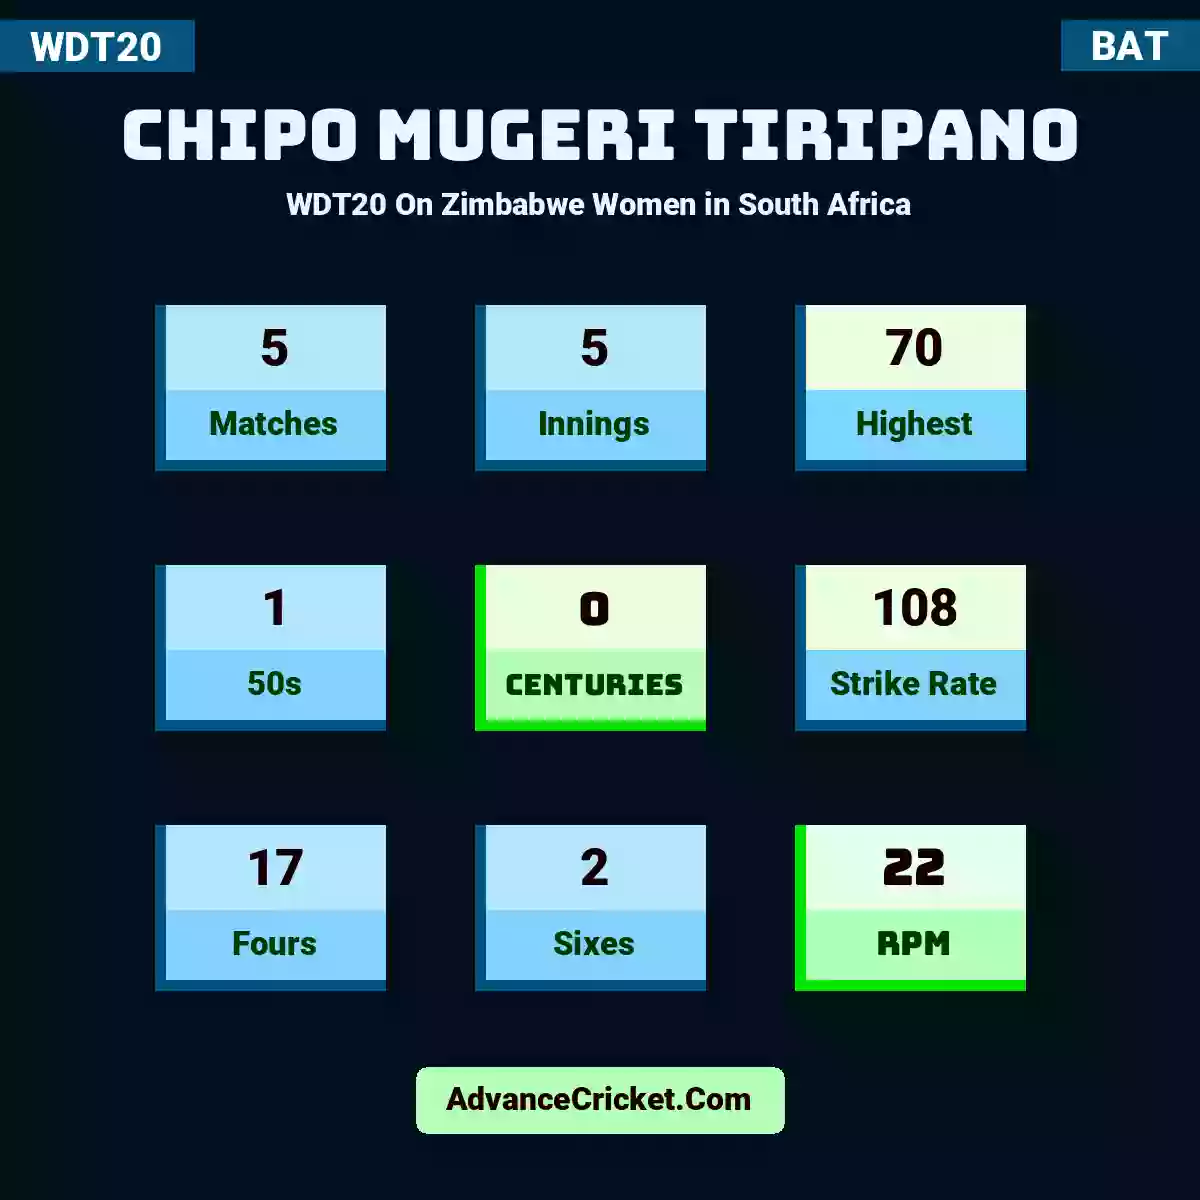 Chipo Mugeri Tiripano WDT20  On Zimbabwe Women in South Africa, Chipo Mugeri Tiripano played 5 matches, scored 70 runs as highest, 1 half-centuries, and 0 centuries, with a strike rate of 108. C.Mugeri-Tiripano hit 17 fours and 2 sixes, with an RPM of 22.